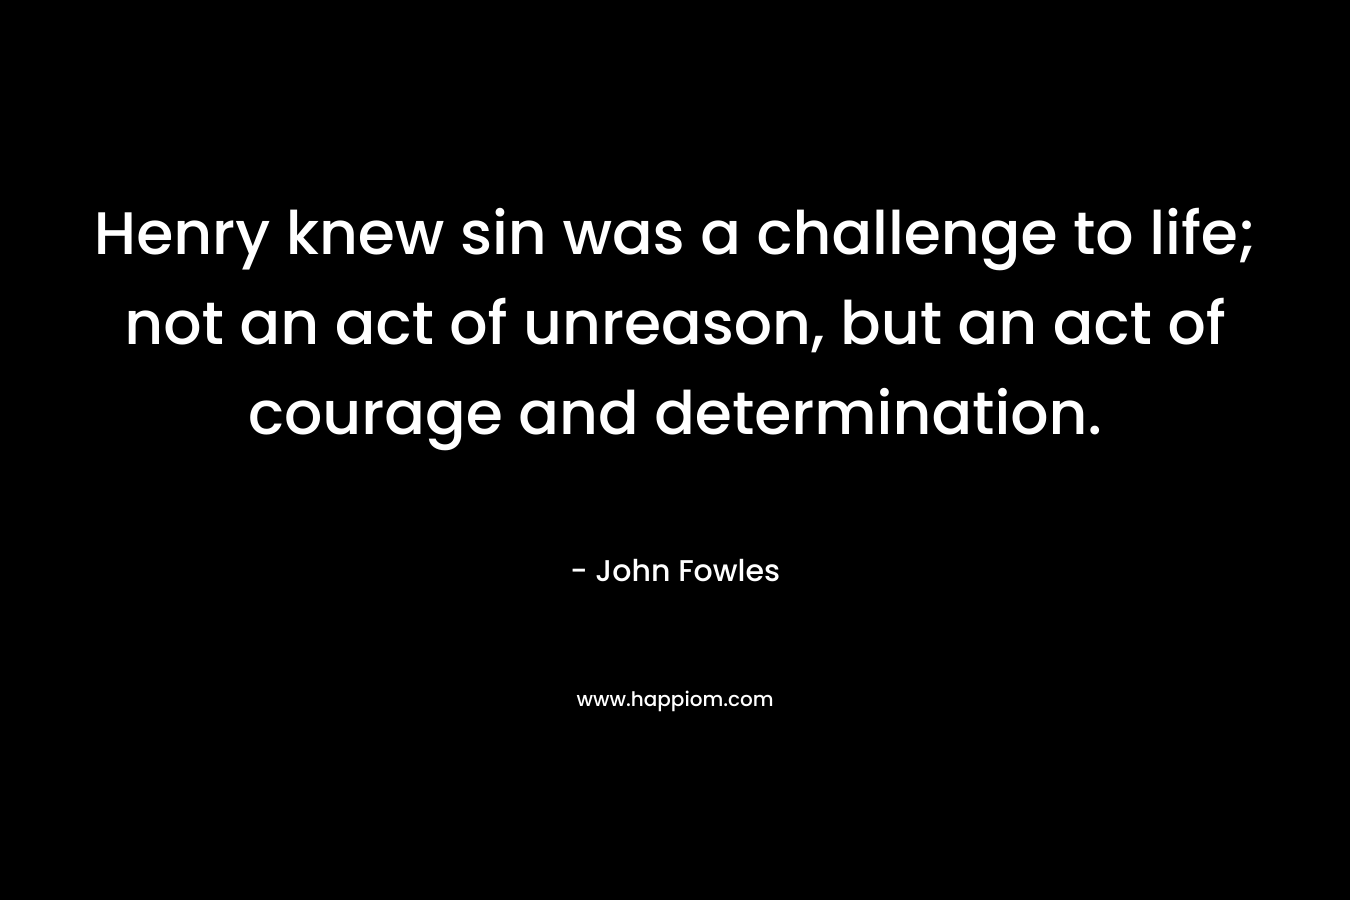 Henry knew sin was a challenge to life; not an act of unreason, but an act of courage and determination.